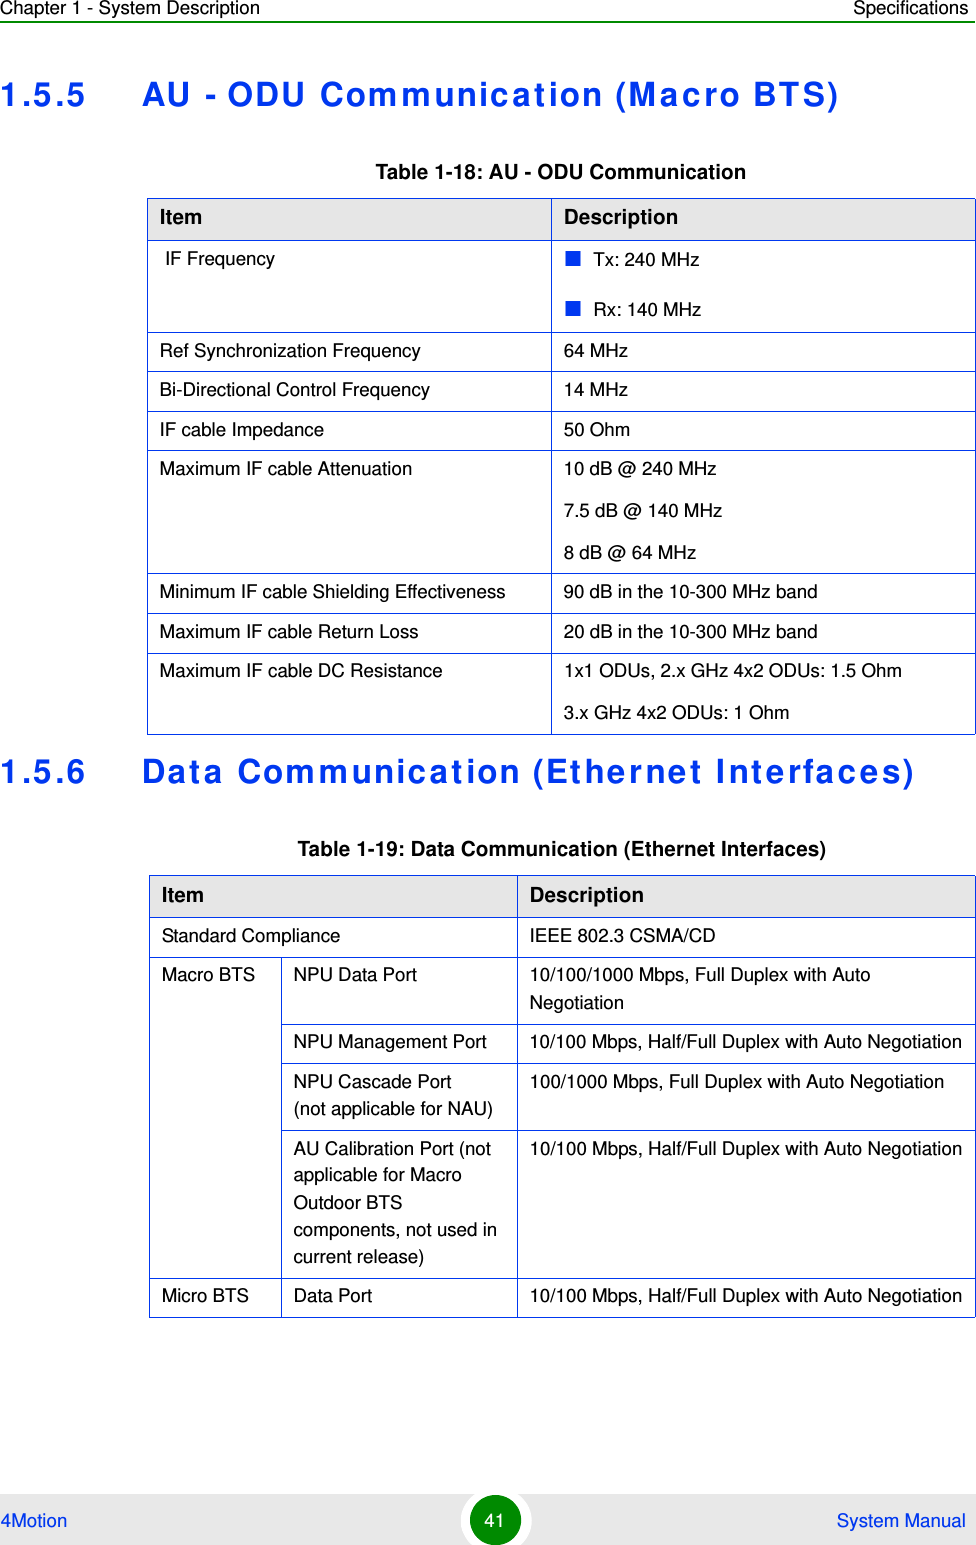 Chapter 1 - System Description Specifications4Motion 41  System Manual1.5.5 AU - ODU Com munic ation (Macro BTS)1.5.6 Data Comm unic ation (Etherne t I nt erfaces)Table 1-18: AU - ODU CommunicationItem Description IF Frequency Tx: 240 MHzRx: 140 MHzRef Synchronization Frequency 64 MHzBi-Directional Control Frequency 14 MHzIF cable Impedance 50 OhmMaximum IF cable Attenuation  10 dB @ 240 MHz7.5 dB @ 140 MHz8 dB @ 64 MHzMinimum IF cable Shielding Effectiveness 90 dB in the 10-300 MHz bandMaximum IF cable Return Loss 20 dB in the 10-300 MHz bandMaximum IF cable DC Resistance 1x1 ODUs, 2.x GHz 4x2 ODUs: 1.5 Ohm3.x GHz 4x2 ODUs: 1 OhmTable 1-19: Data Communication (Ethernet Interfaces)Item DescriptionStandard Compliance IEEE 802.3 CSMA/CDMacro BTS  NPU Data Port  10/100/1000 Mbps, Full Duplex with Auto NegotiationNPU Management Port  10/100 Mbps, Half/Full Duplex with Auto NegotiationNPU Cascade Port (not applicable for NAU)100/1000 Mbps, Full Duplex with Auto NegotiationAU Calibration Port (not applicable for Macro Outdoor BTS components, not used in current release)10/100 Mbps, Half/Full Duplex with Auto NegotiationMicro BTS Data Port 10/100 Mbps, Half/Full Duplex with Auto Negotiation